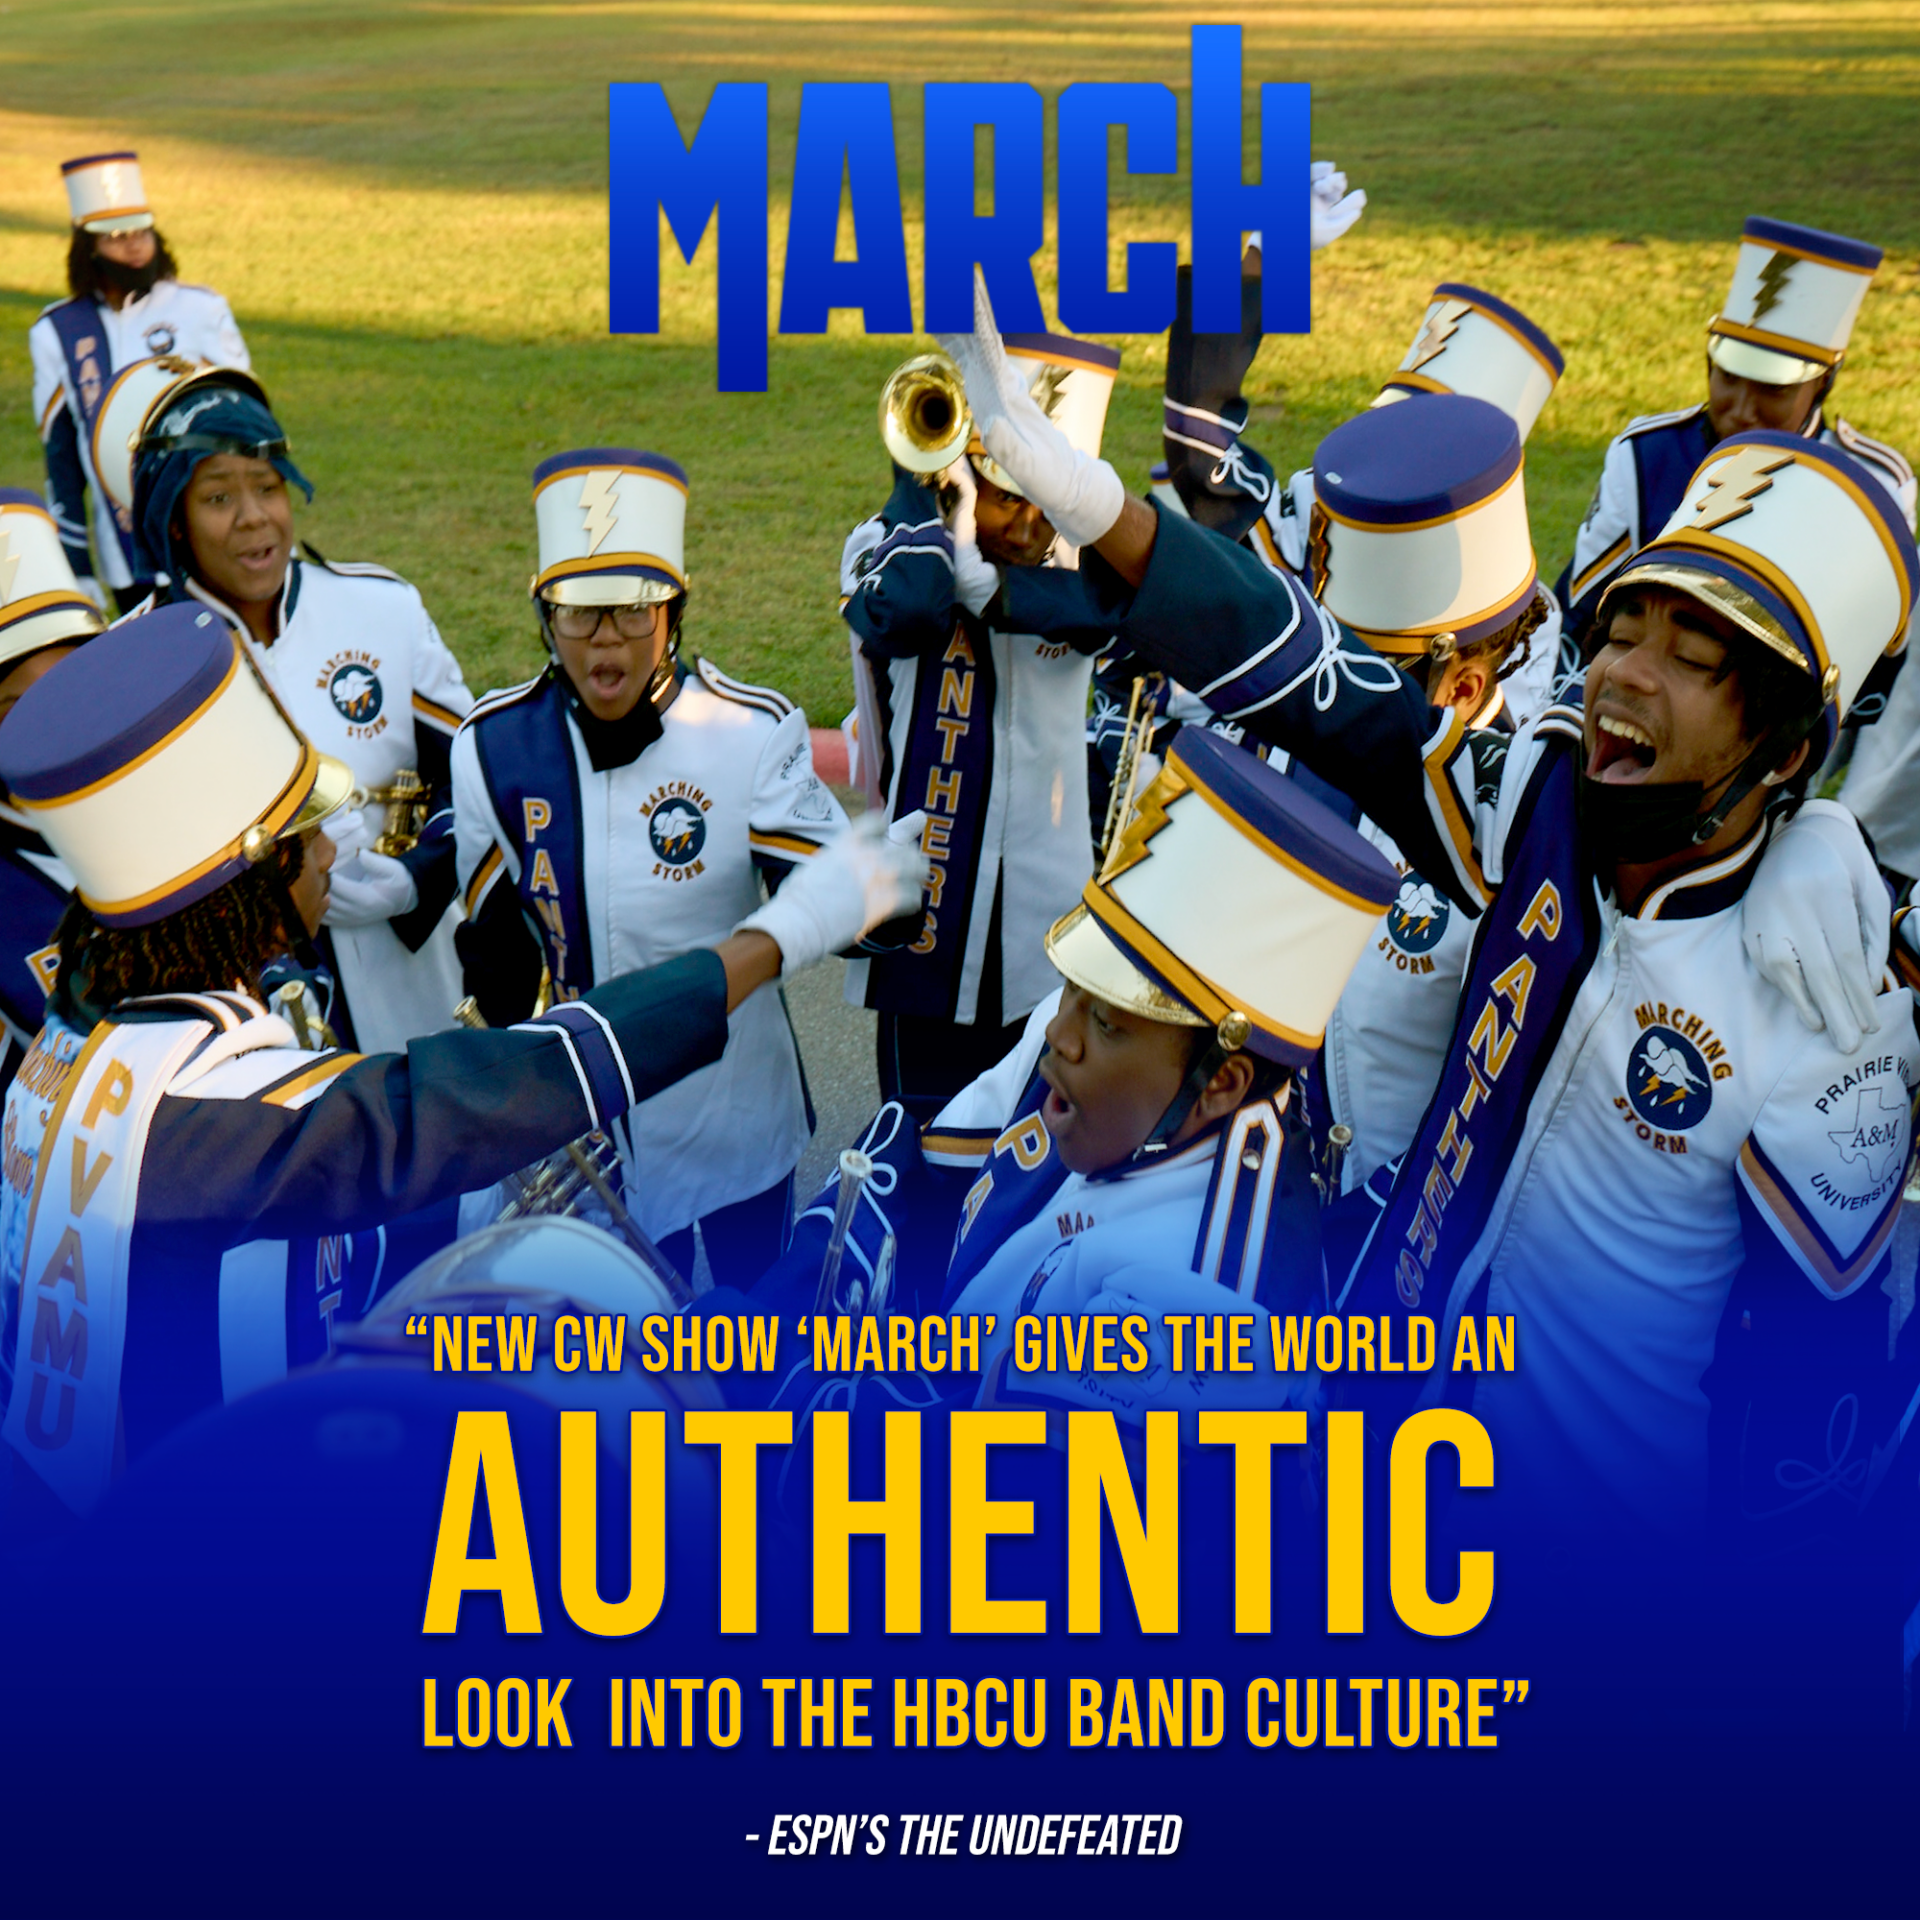 Marching Storm members celebrate. The title "March" is at the top, and a quote from ESPN's Undefeated is below, stating "New CW Show March Gives The World An Authentic Look Into The HBCU Band Culture."